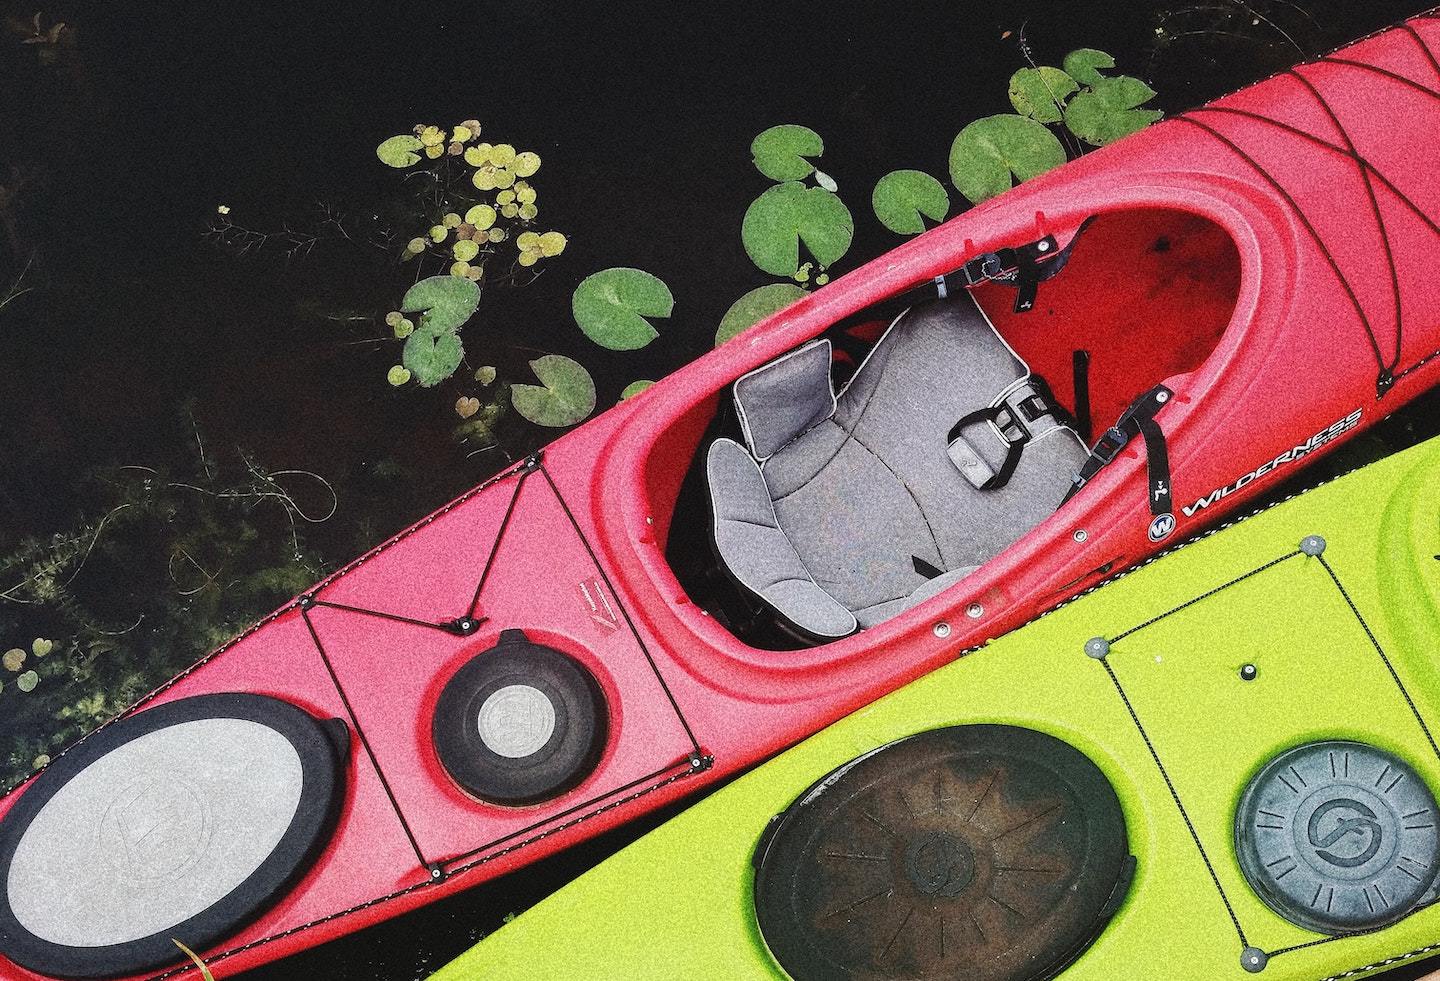 two kayaks with a seat floating on lily pads